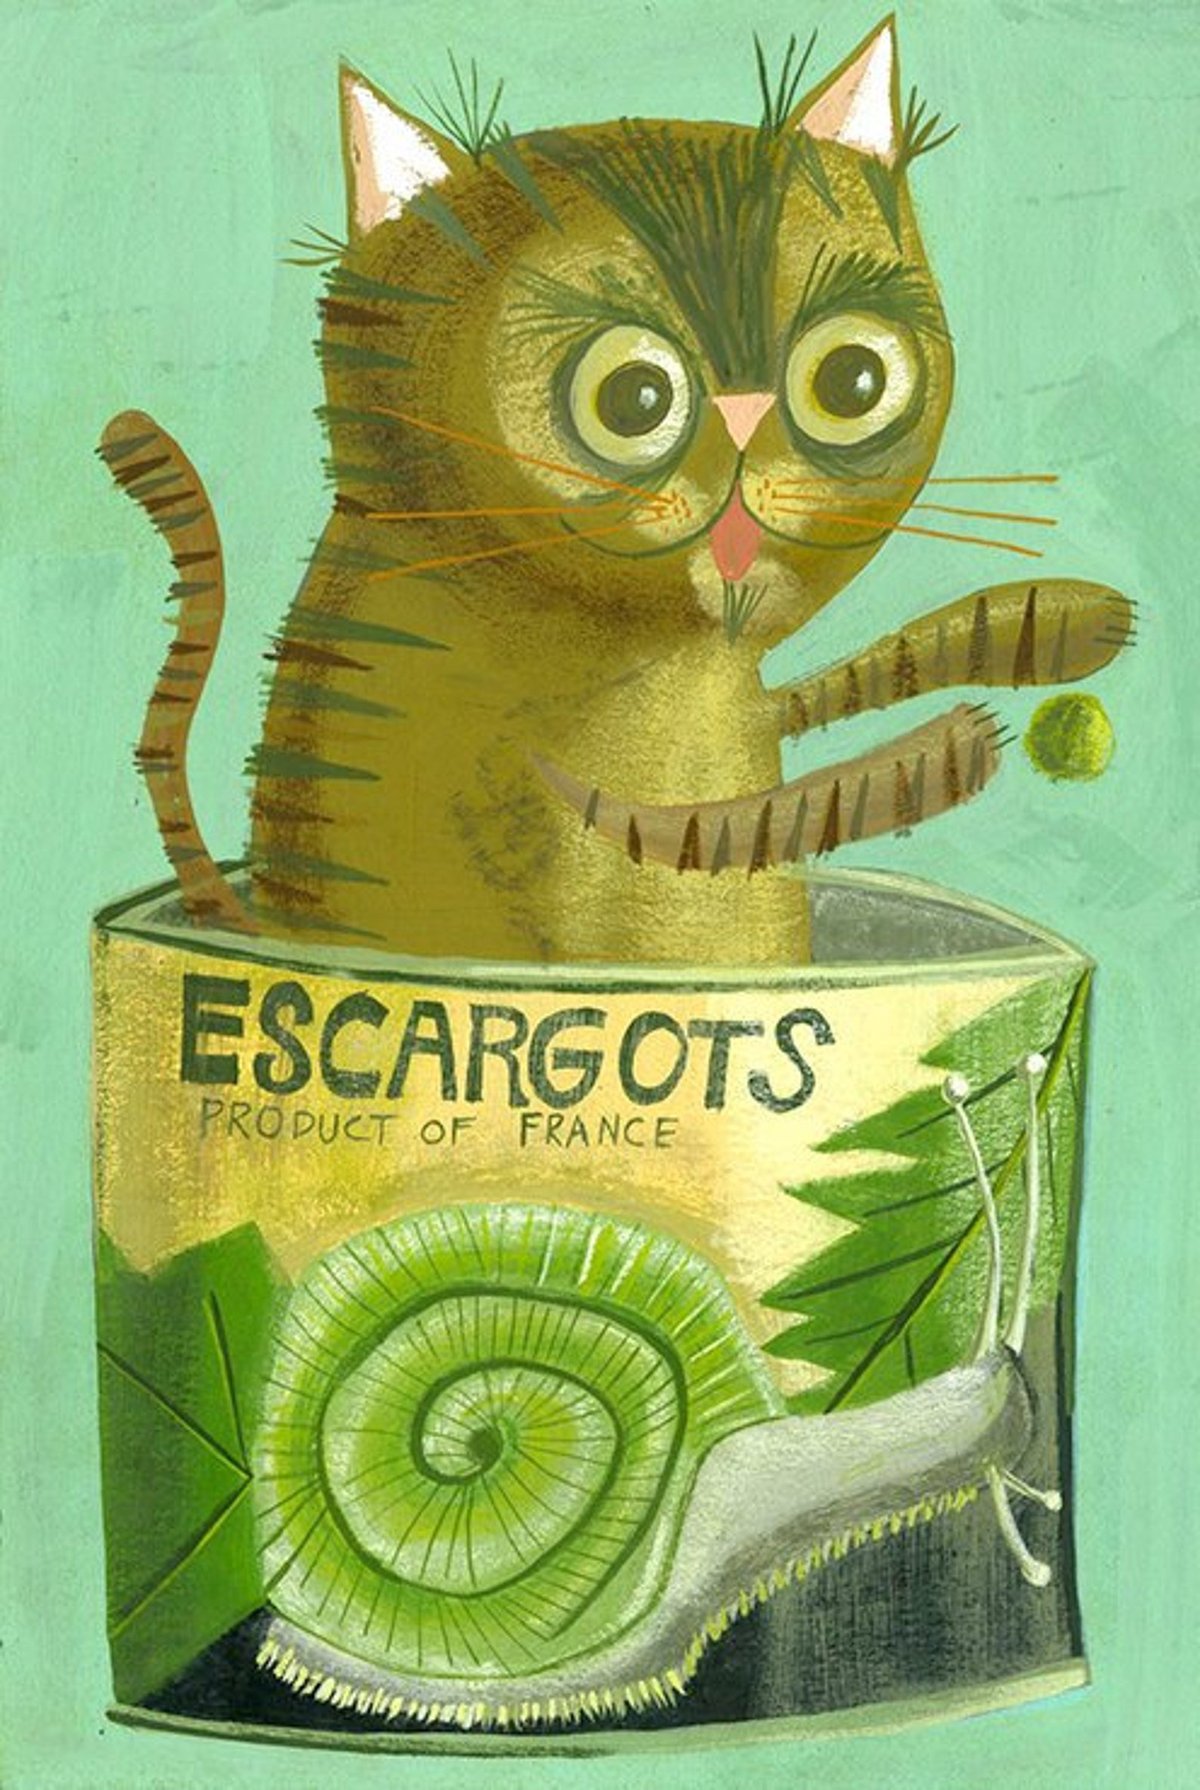 Image of Simon in an escargot cat. Limited edition print.